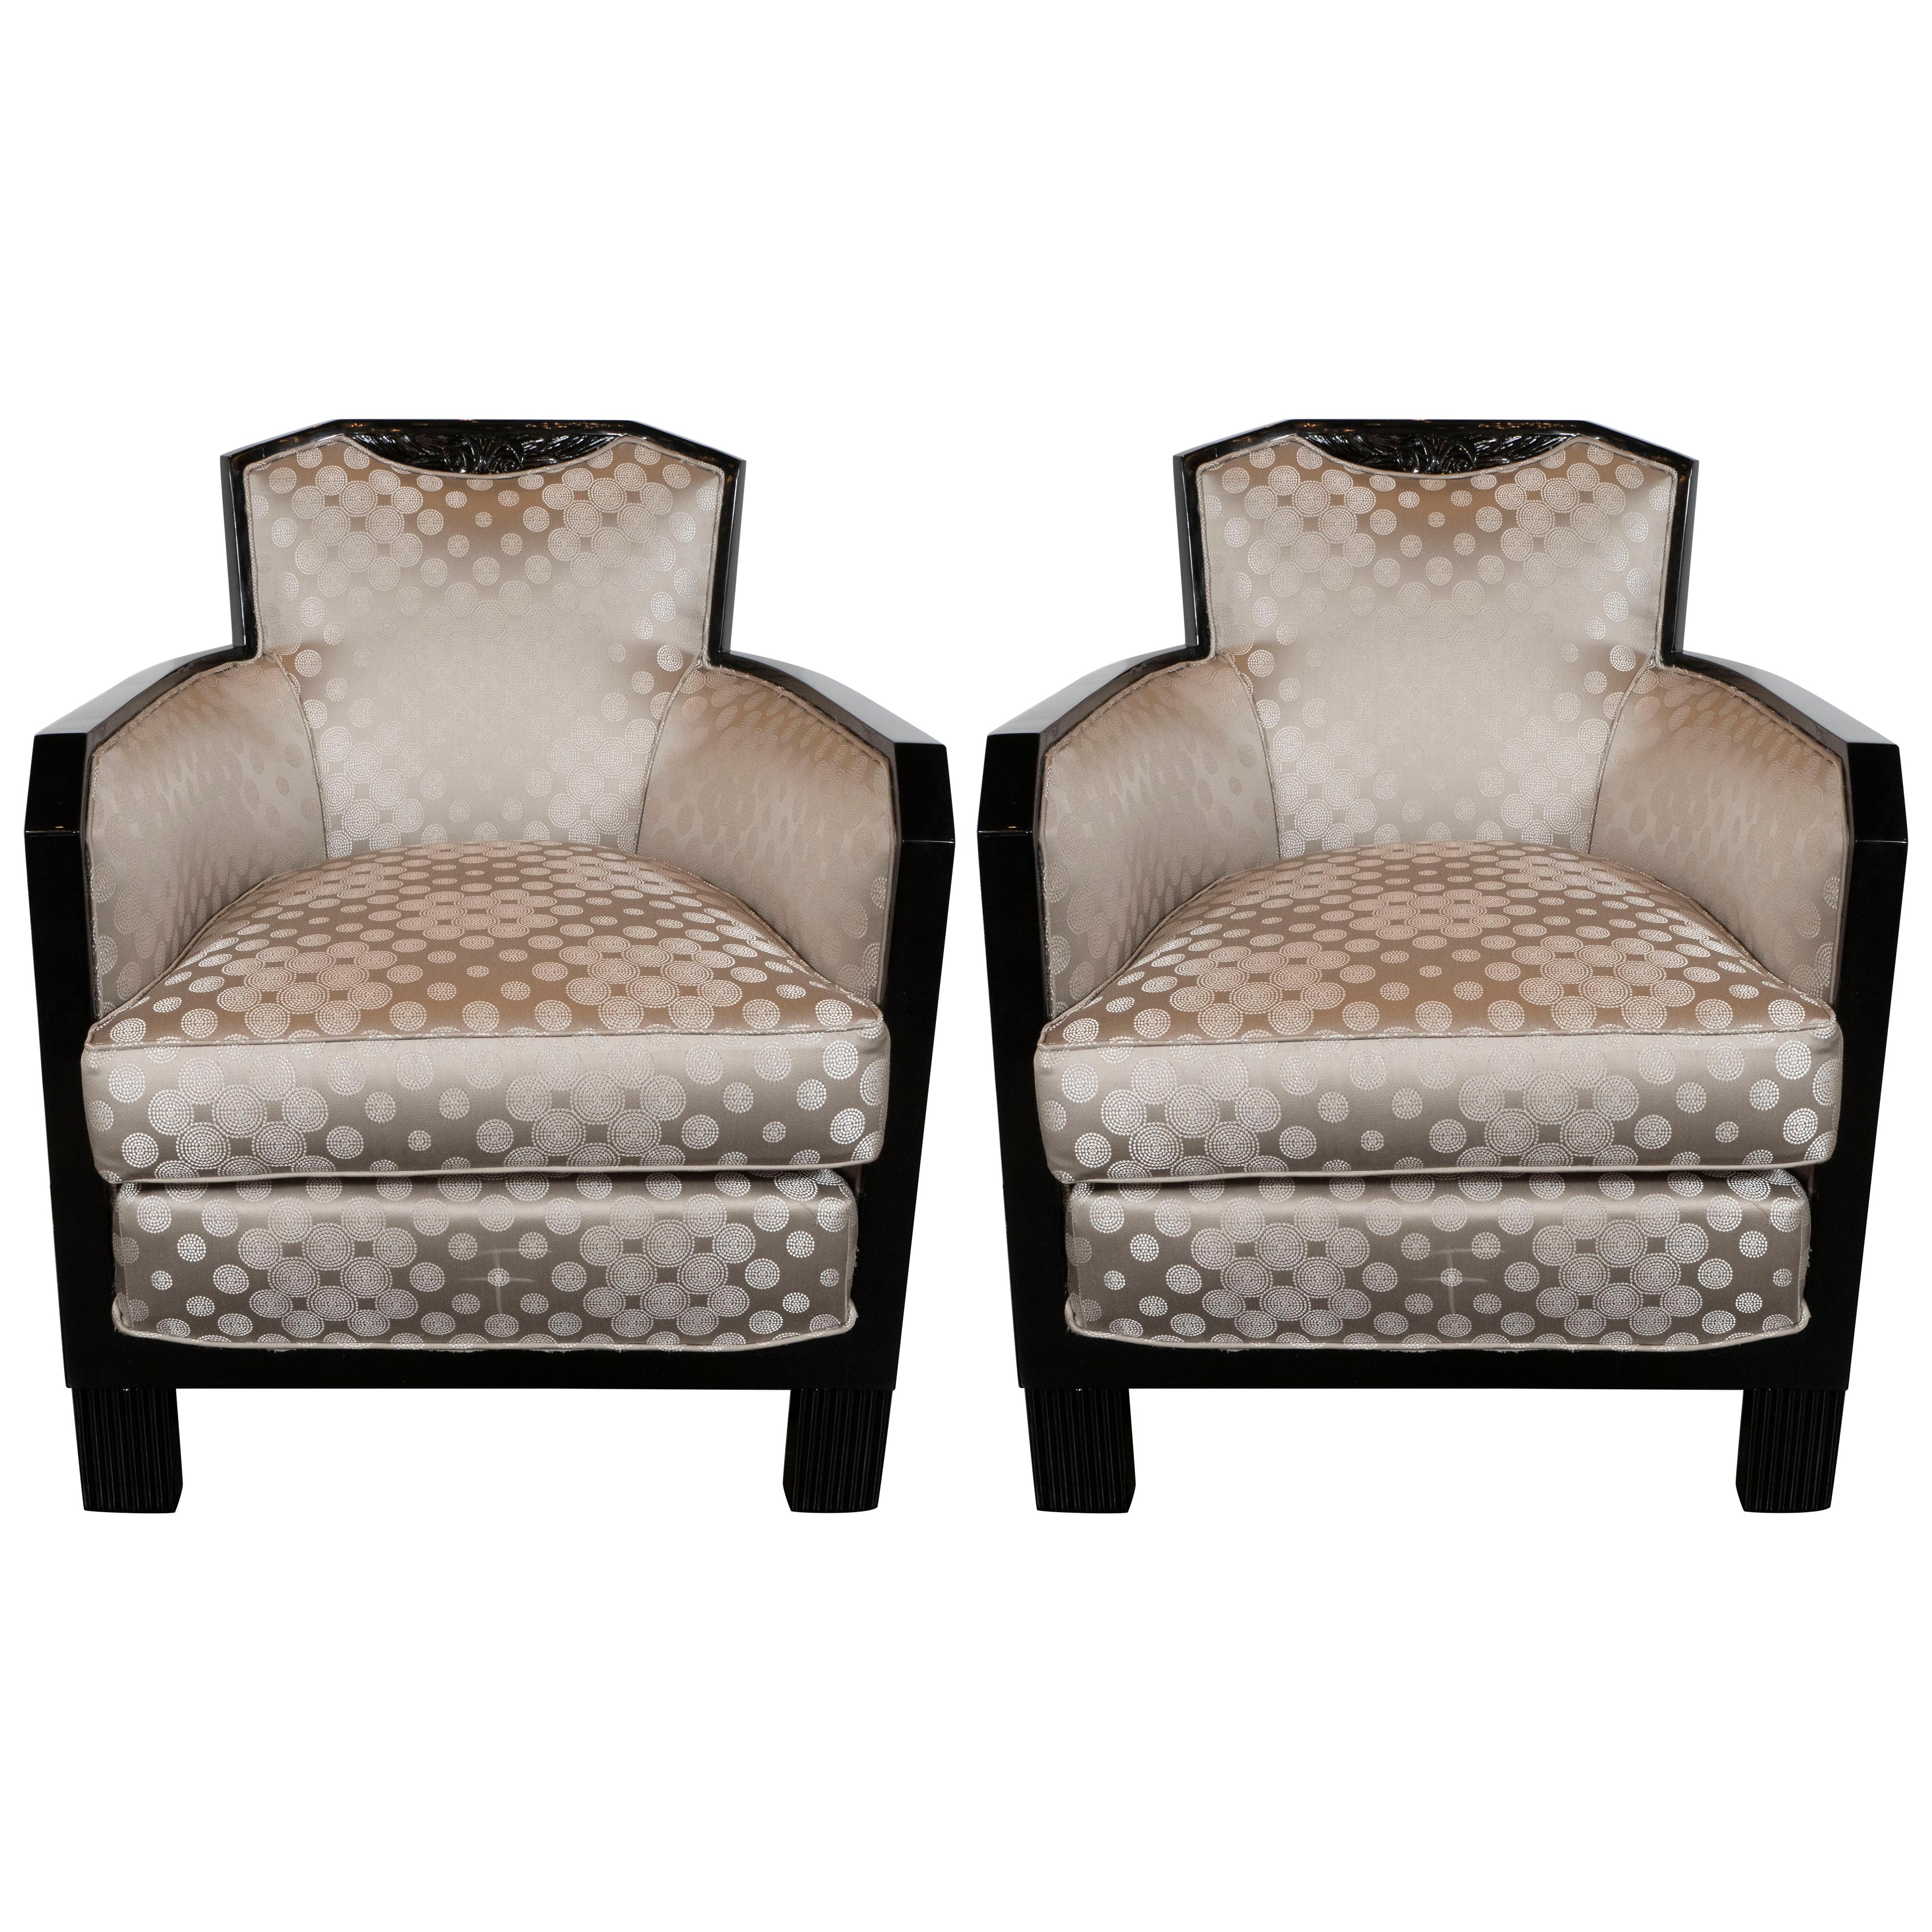 Art Deco Black Lacquer and Platinum Silk Club Chairs with Cubist Detailing